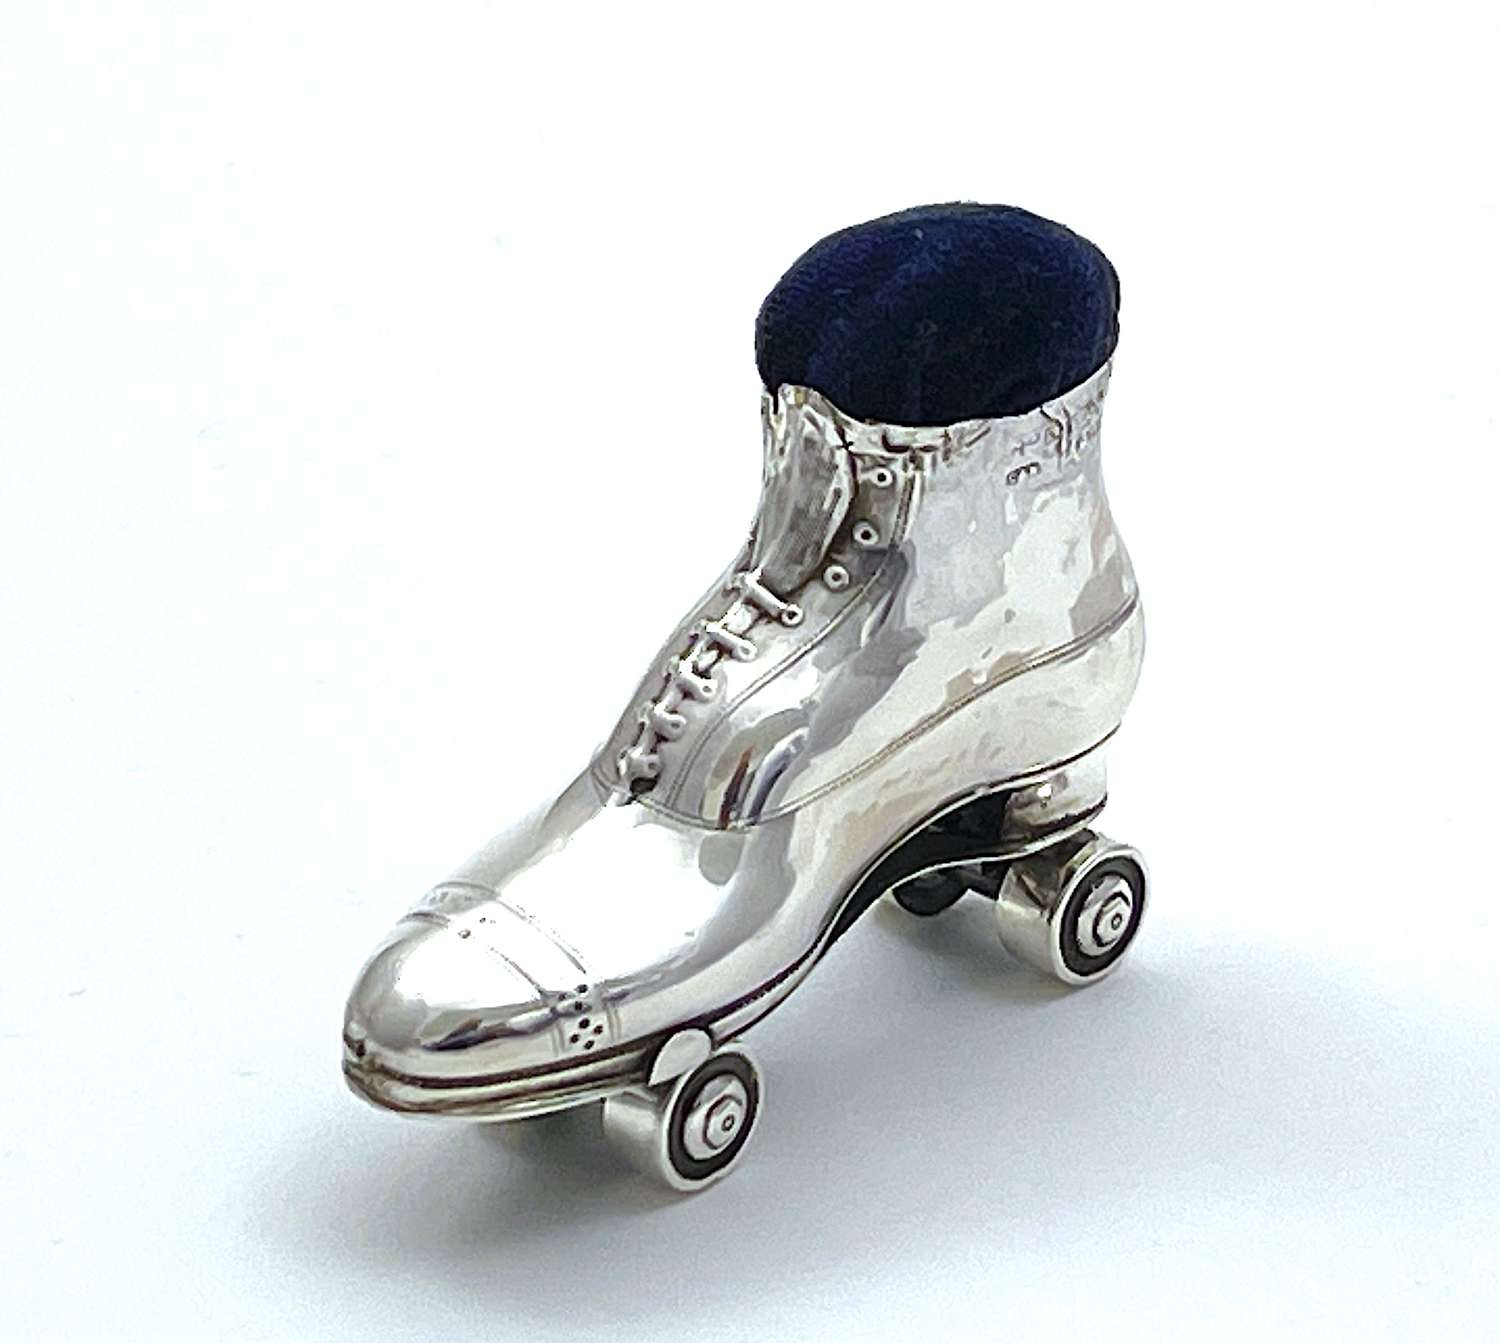 Antique Silver Novelty Roller Skate Pin Cushion